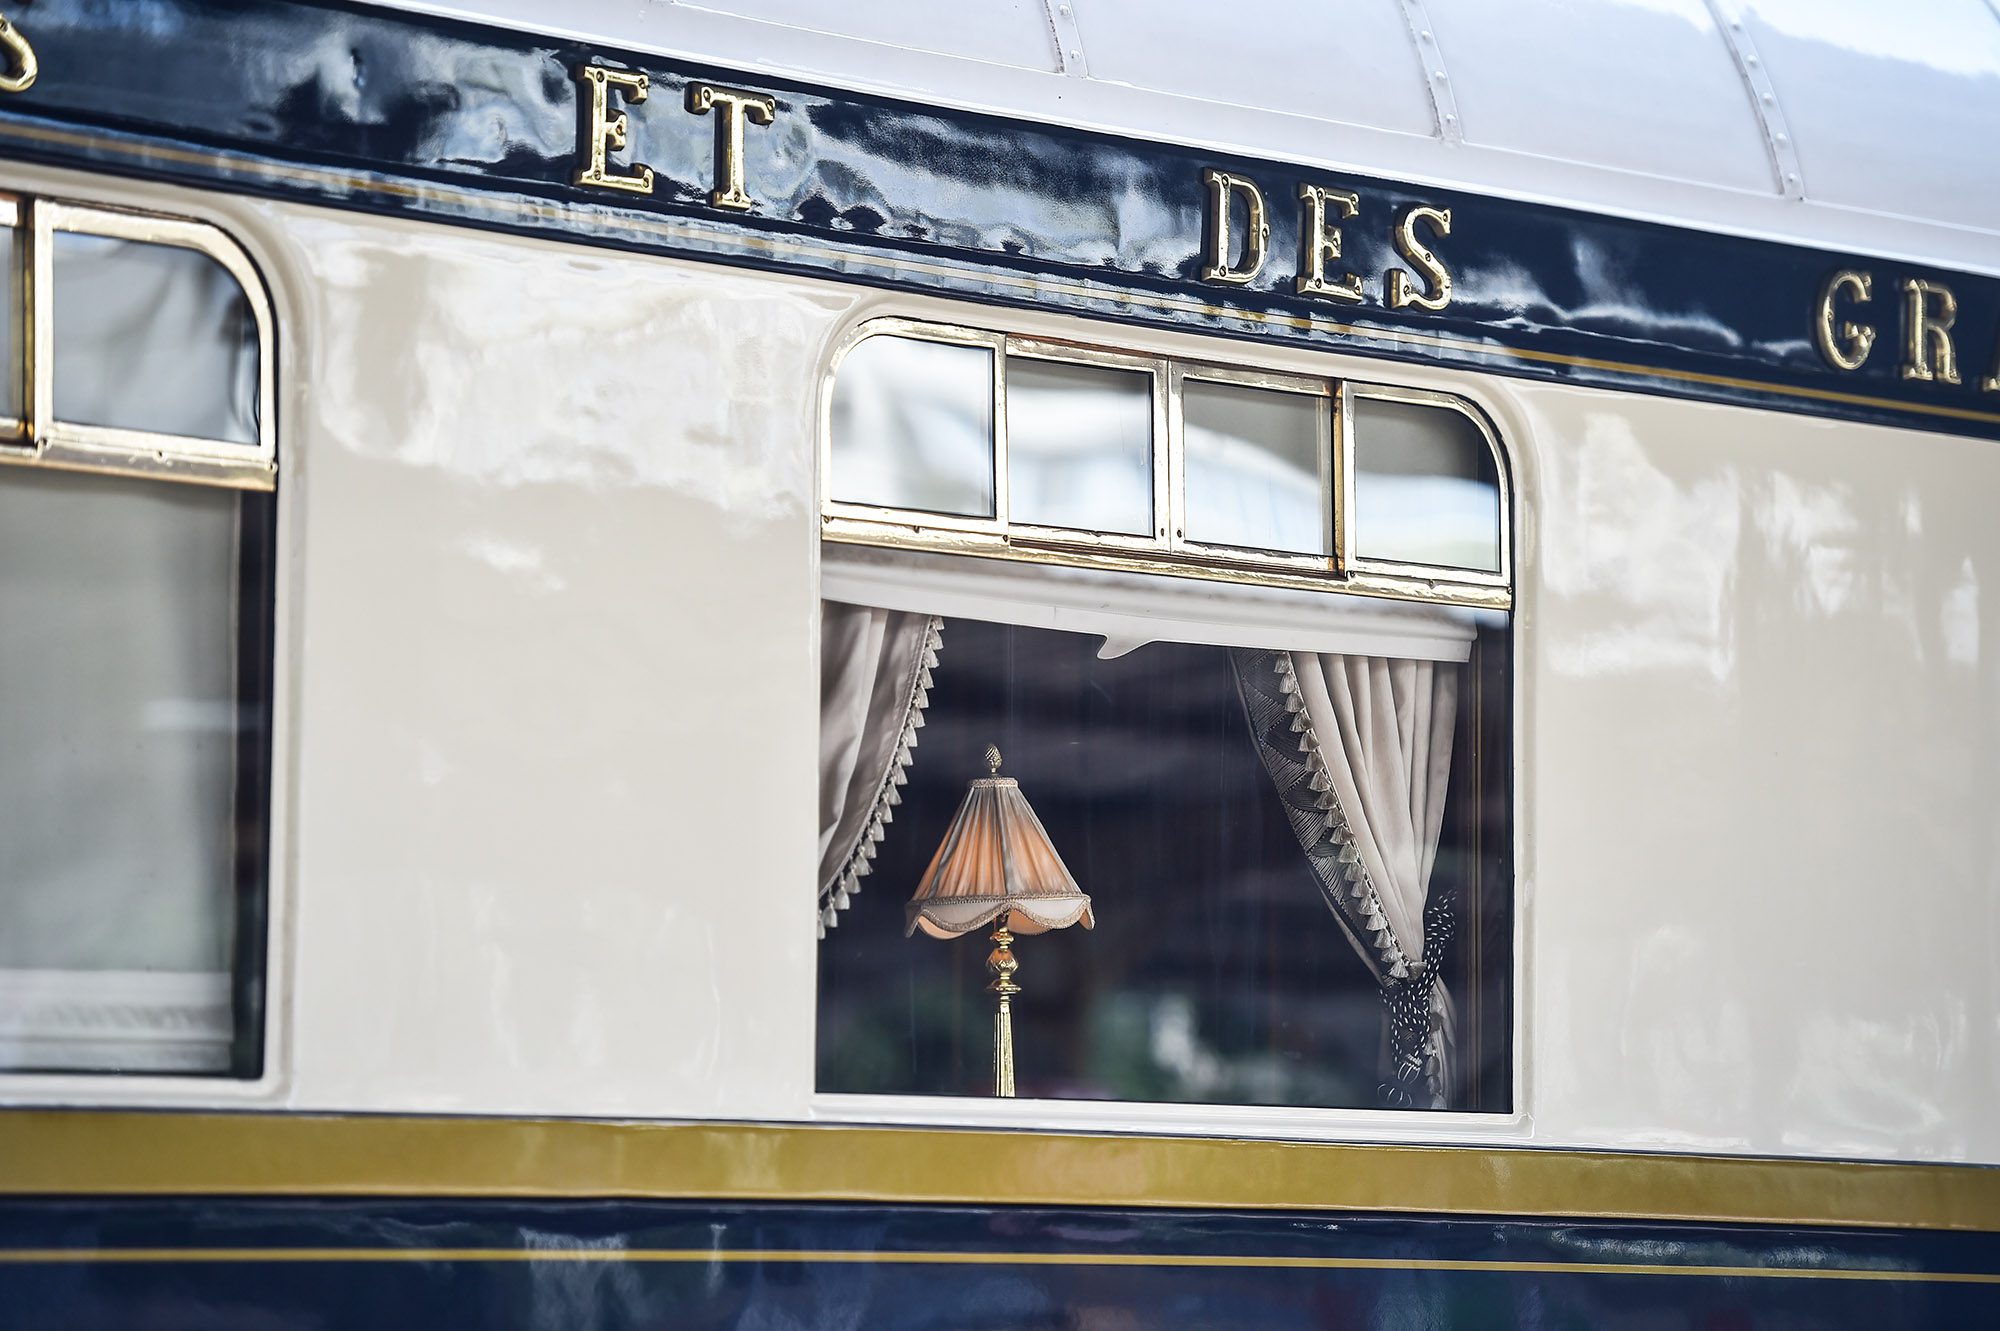 Look inside the VERY luxurious Orient Express train launching in